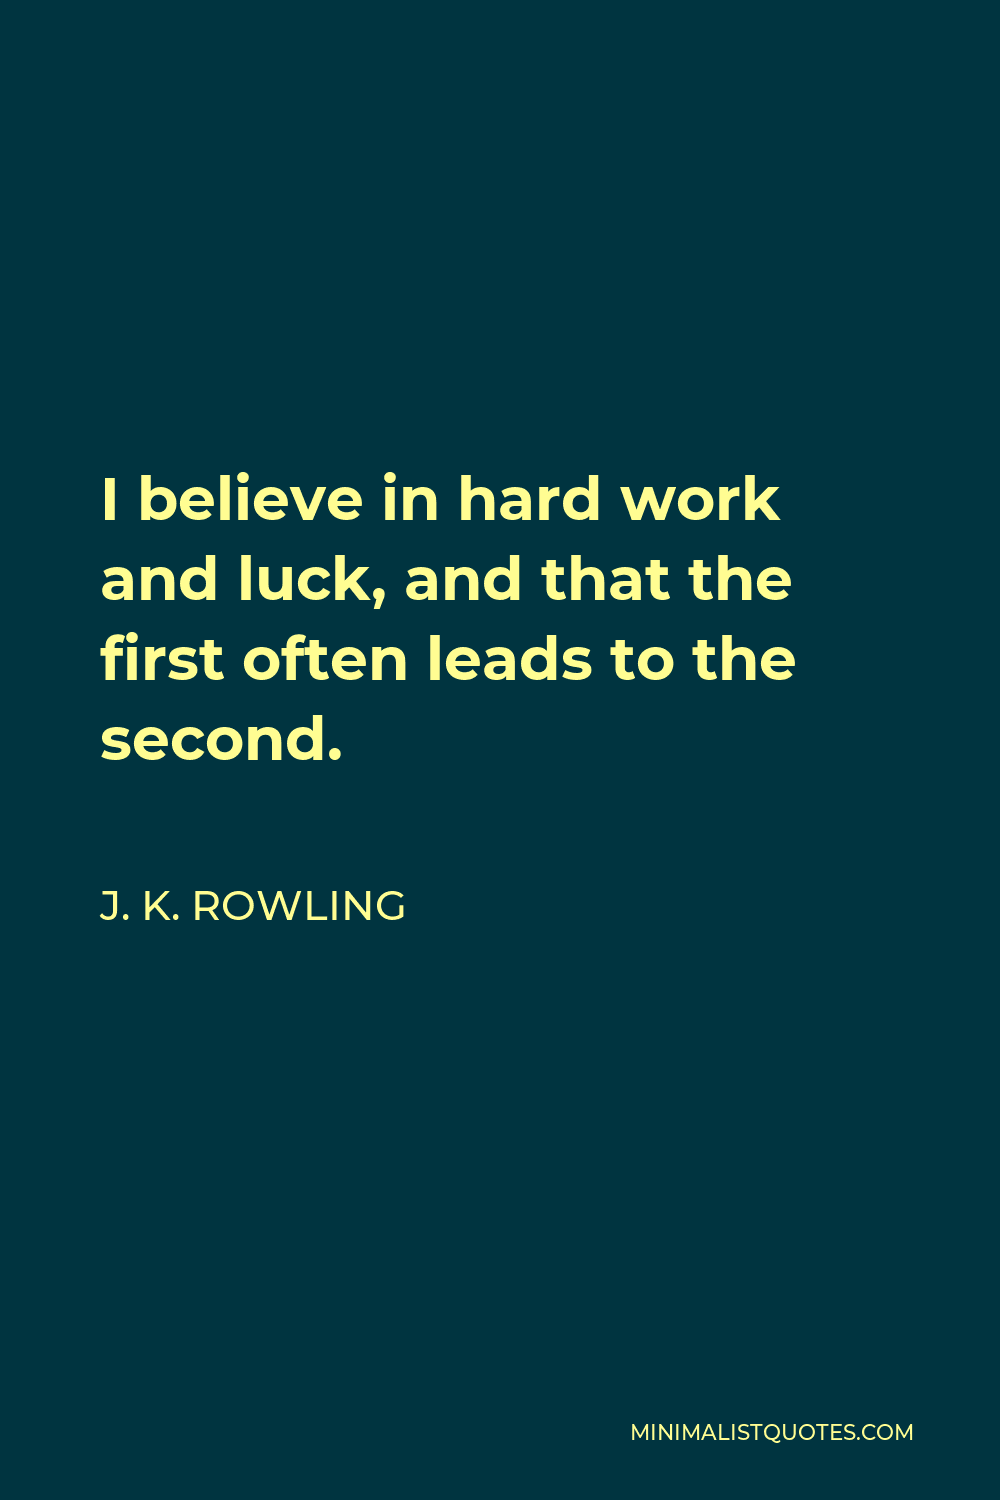 J. K. Rowling Quote - I believe in hard work and luck, and that the first often leads to the second.